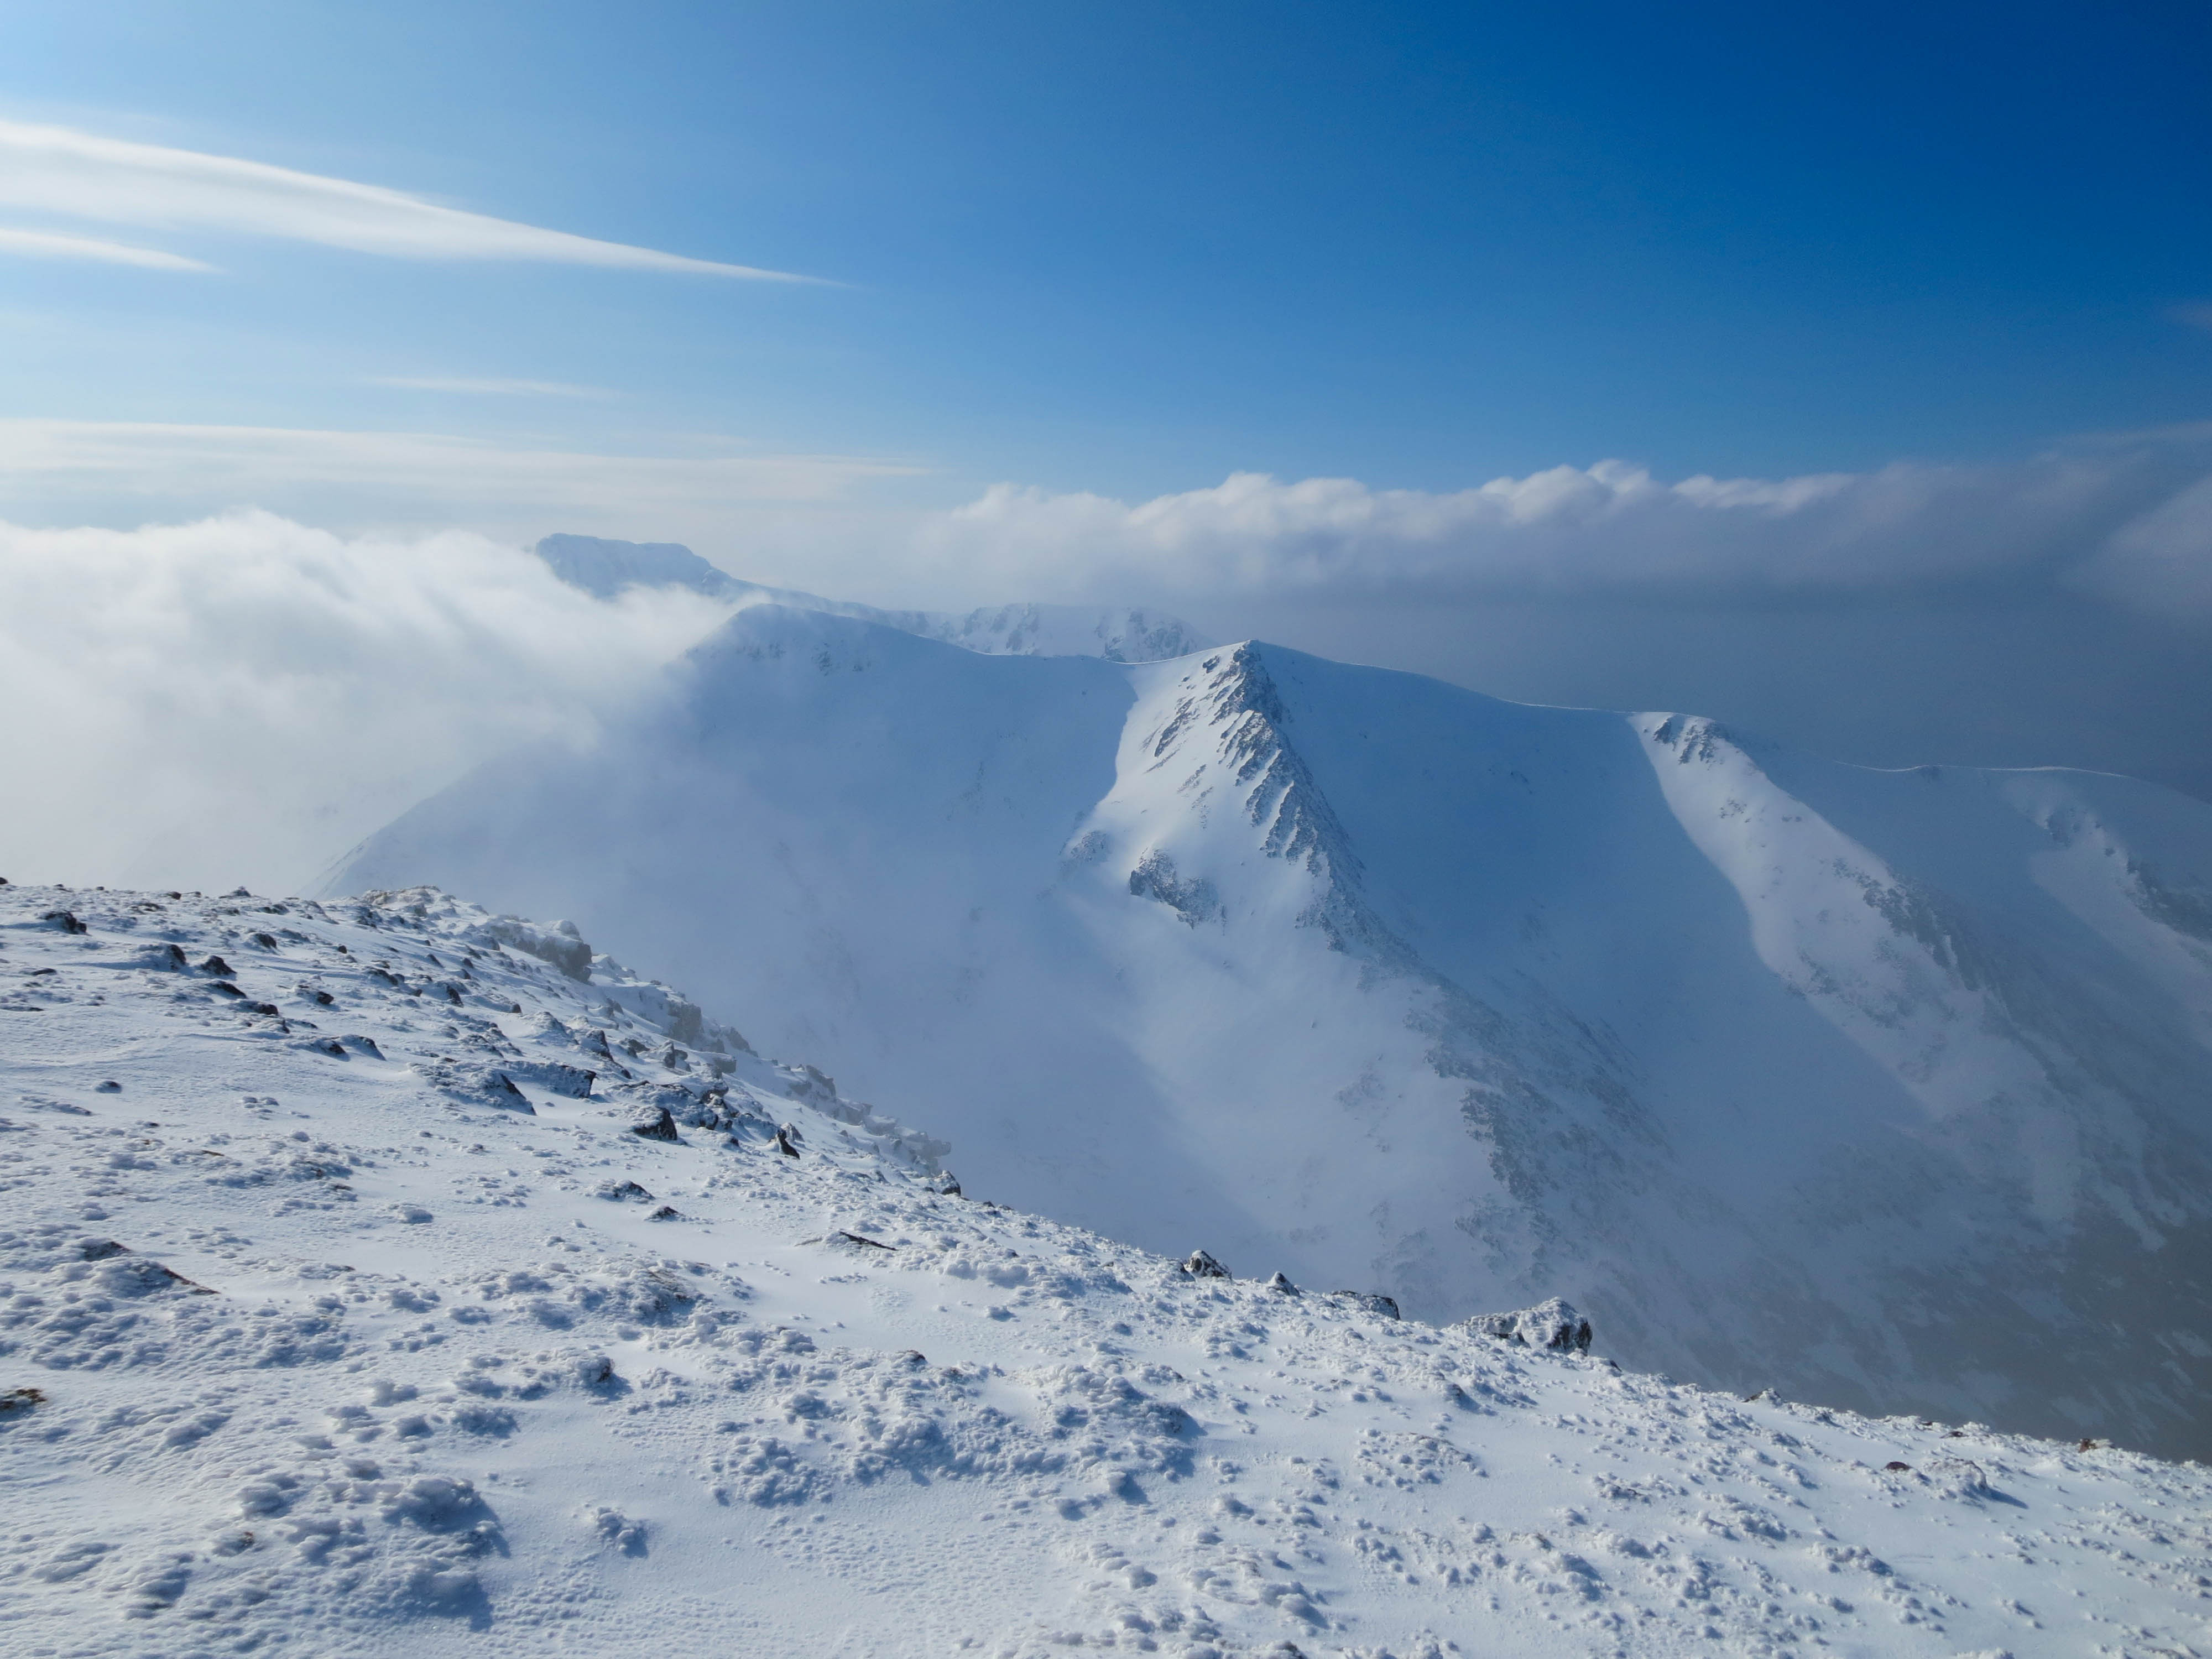 Ben Nevis and Ben Dearg Mor from Aonach Mor. Photo by Keith Gault. March 2015.